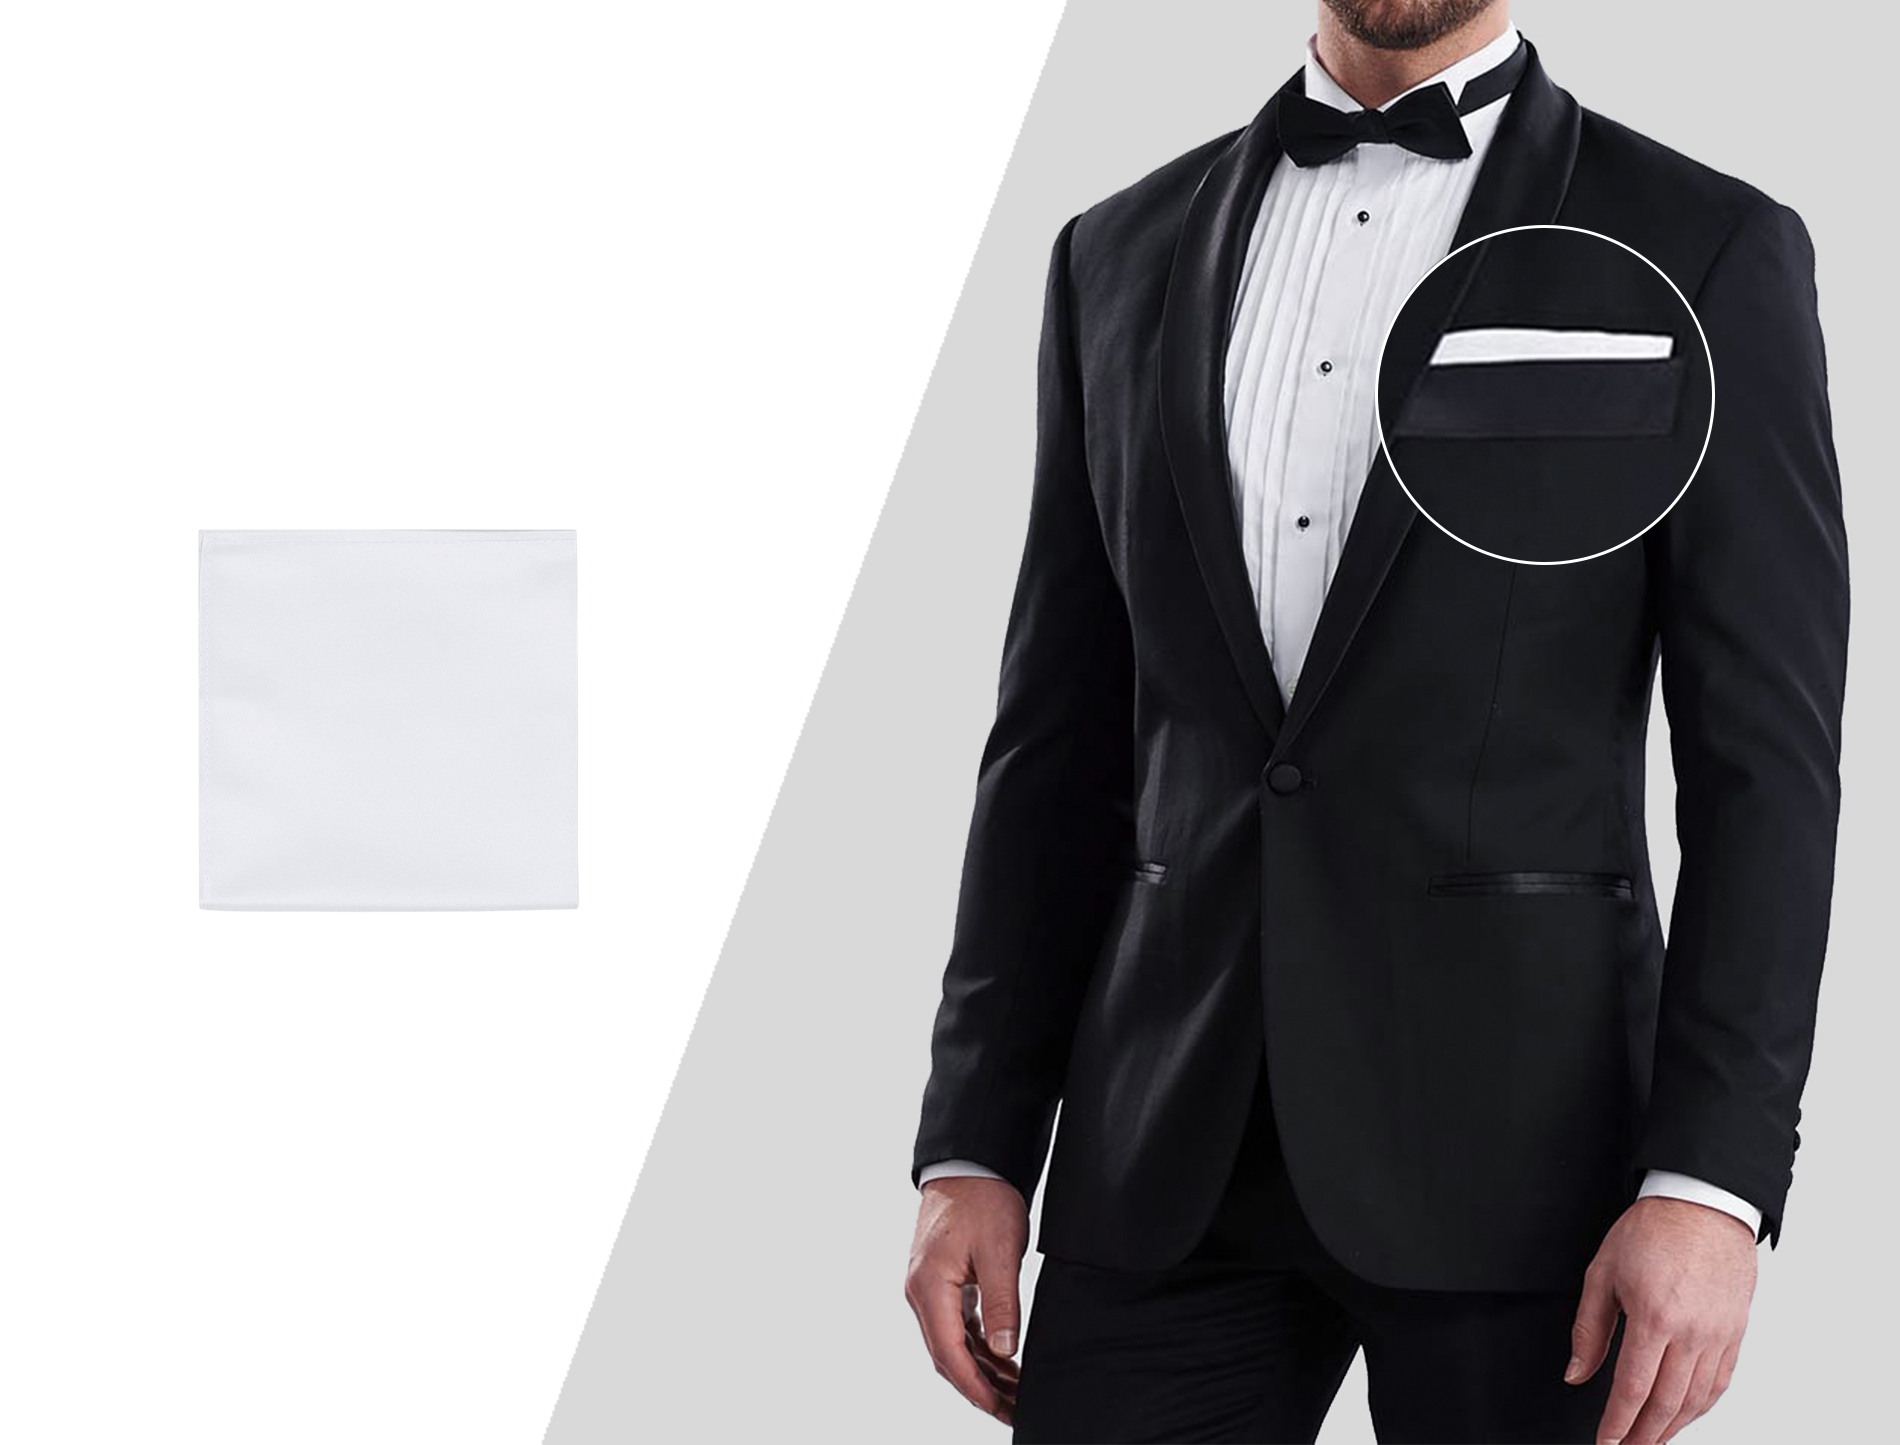 wearing a white pocket square with a black tuxedo